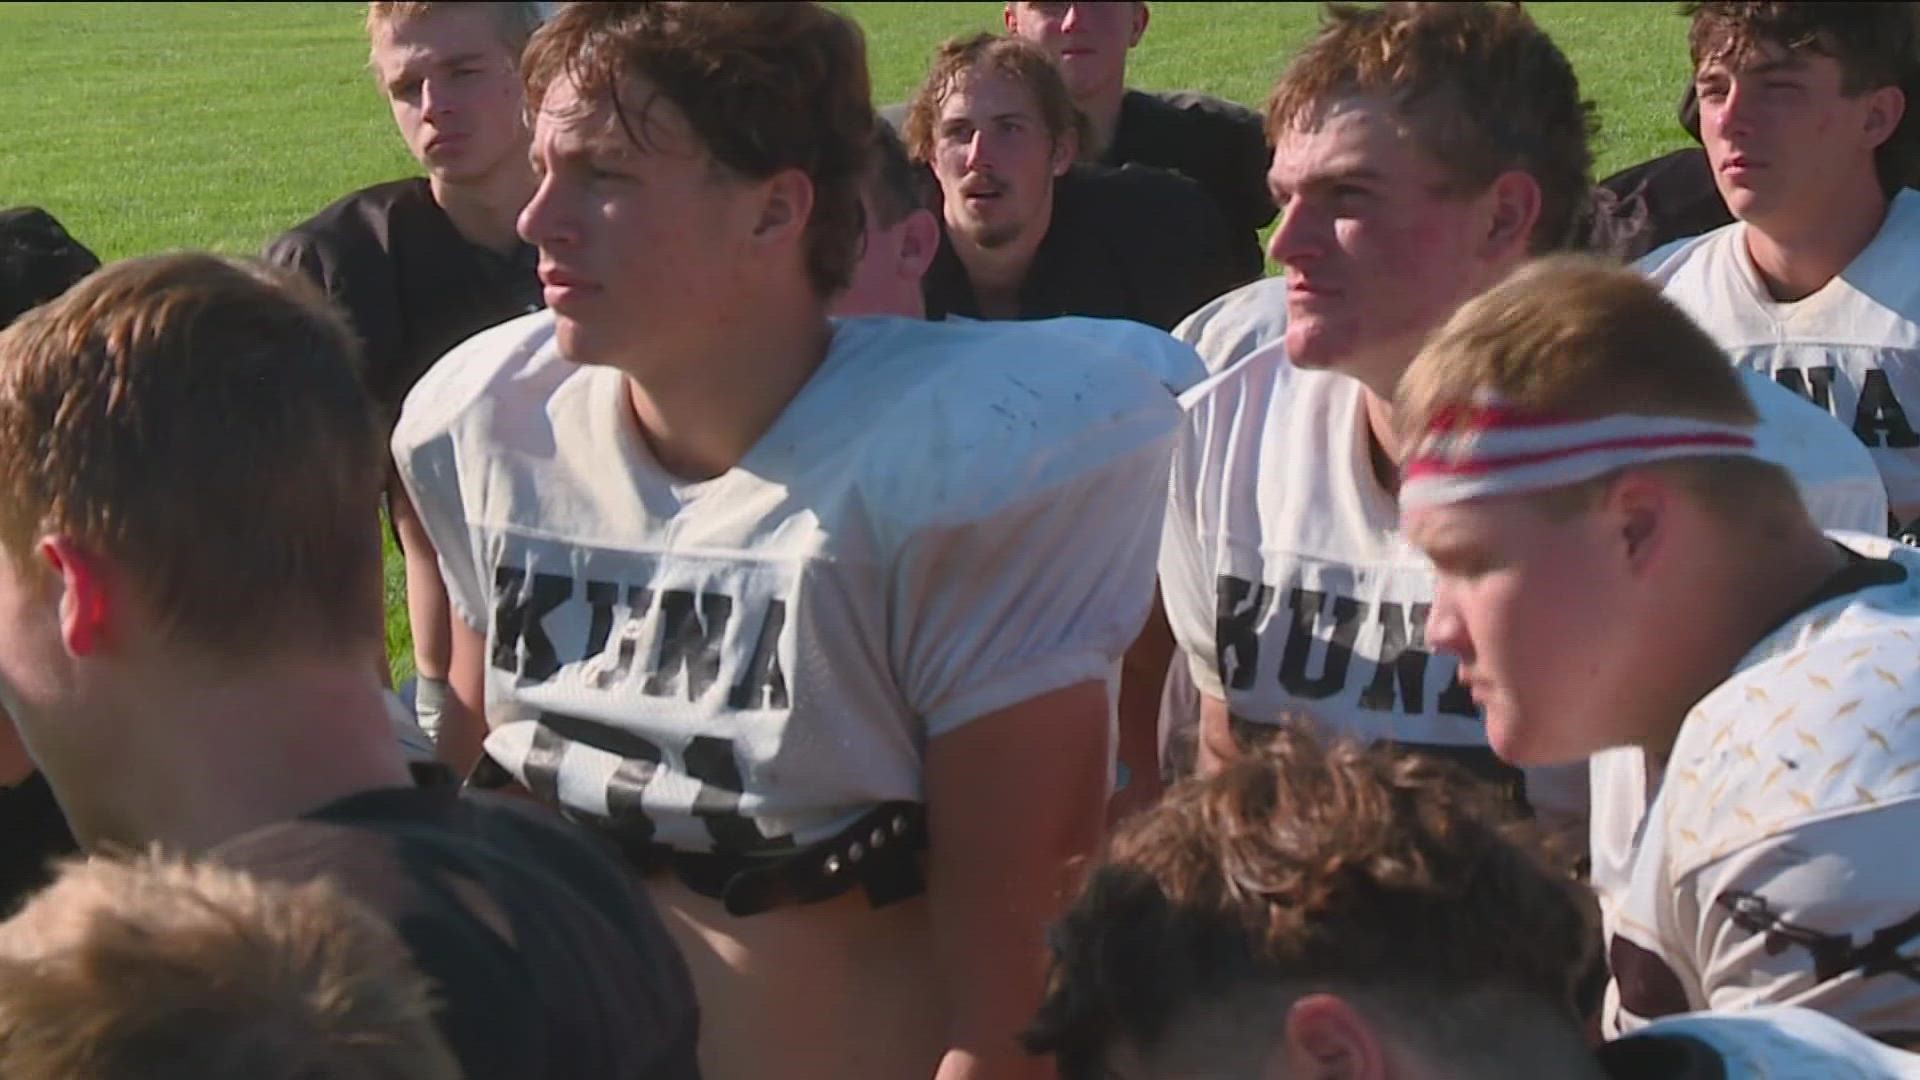 After winning the 4A state title three years ago, the Kuna Kavemen have struggled in the 5A SIC. However, the 2022 squad is ready prepared to turn some heads.